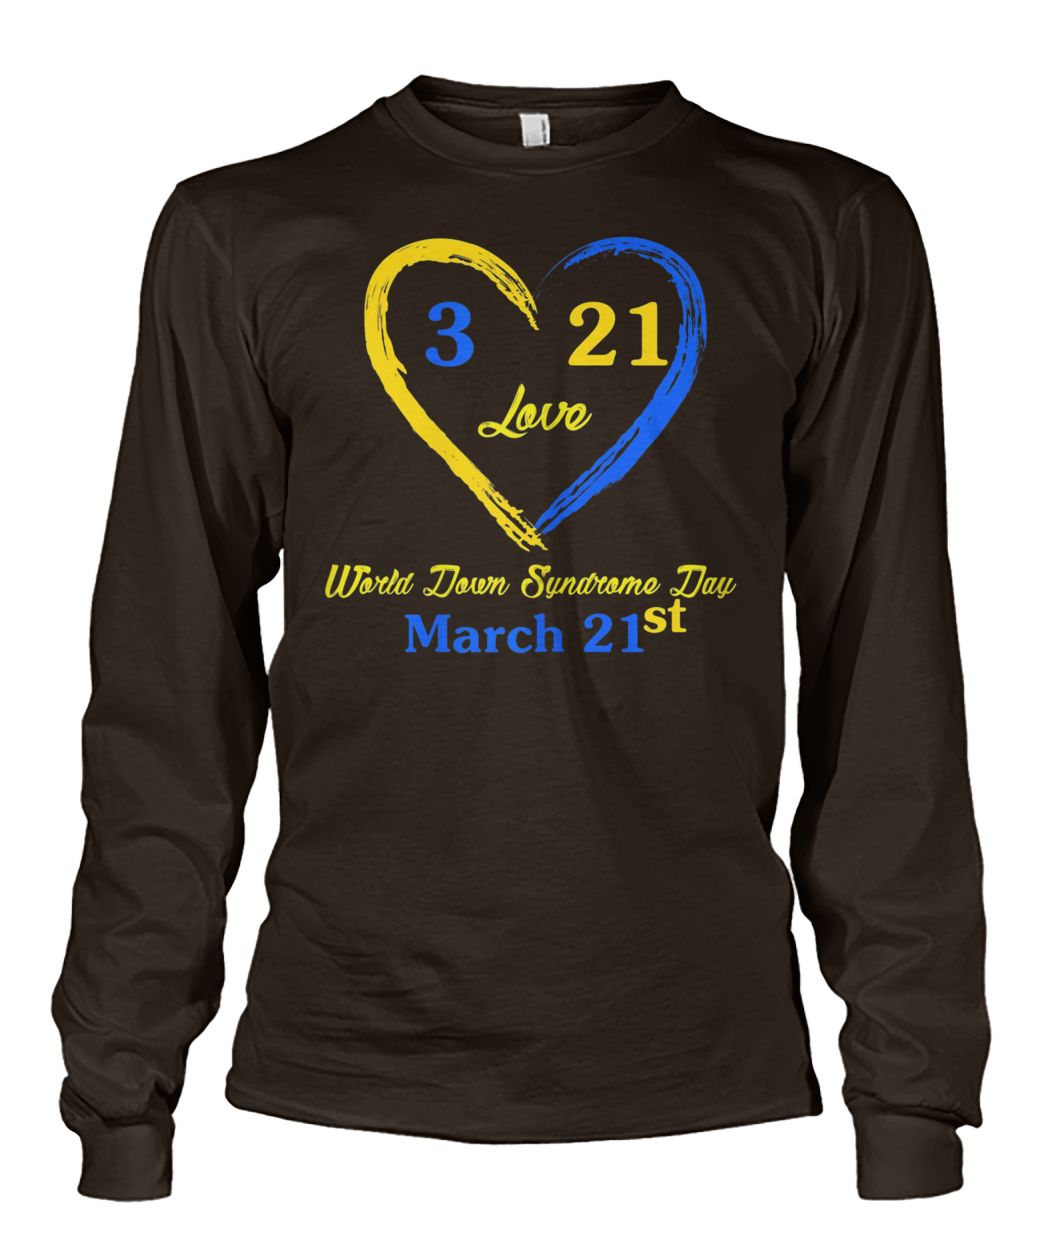 World down syndrome day awareness march 21 unisex long sleeve